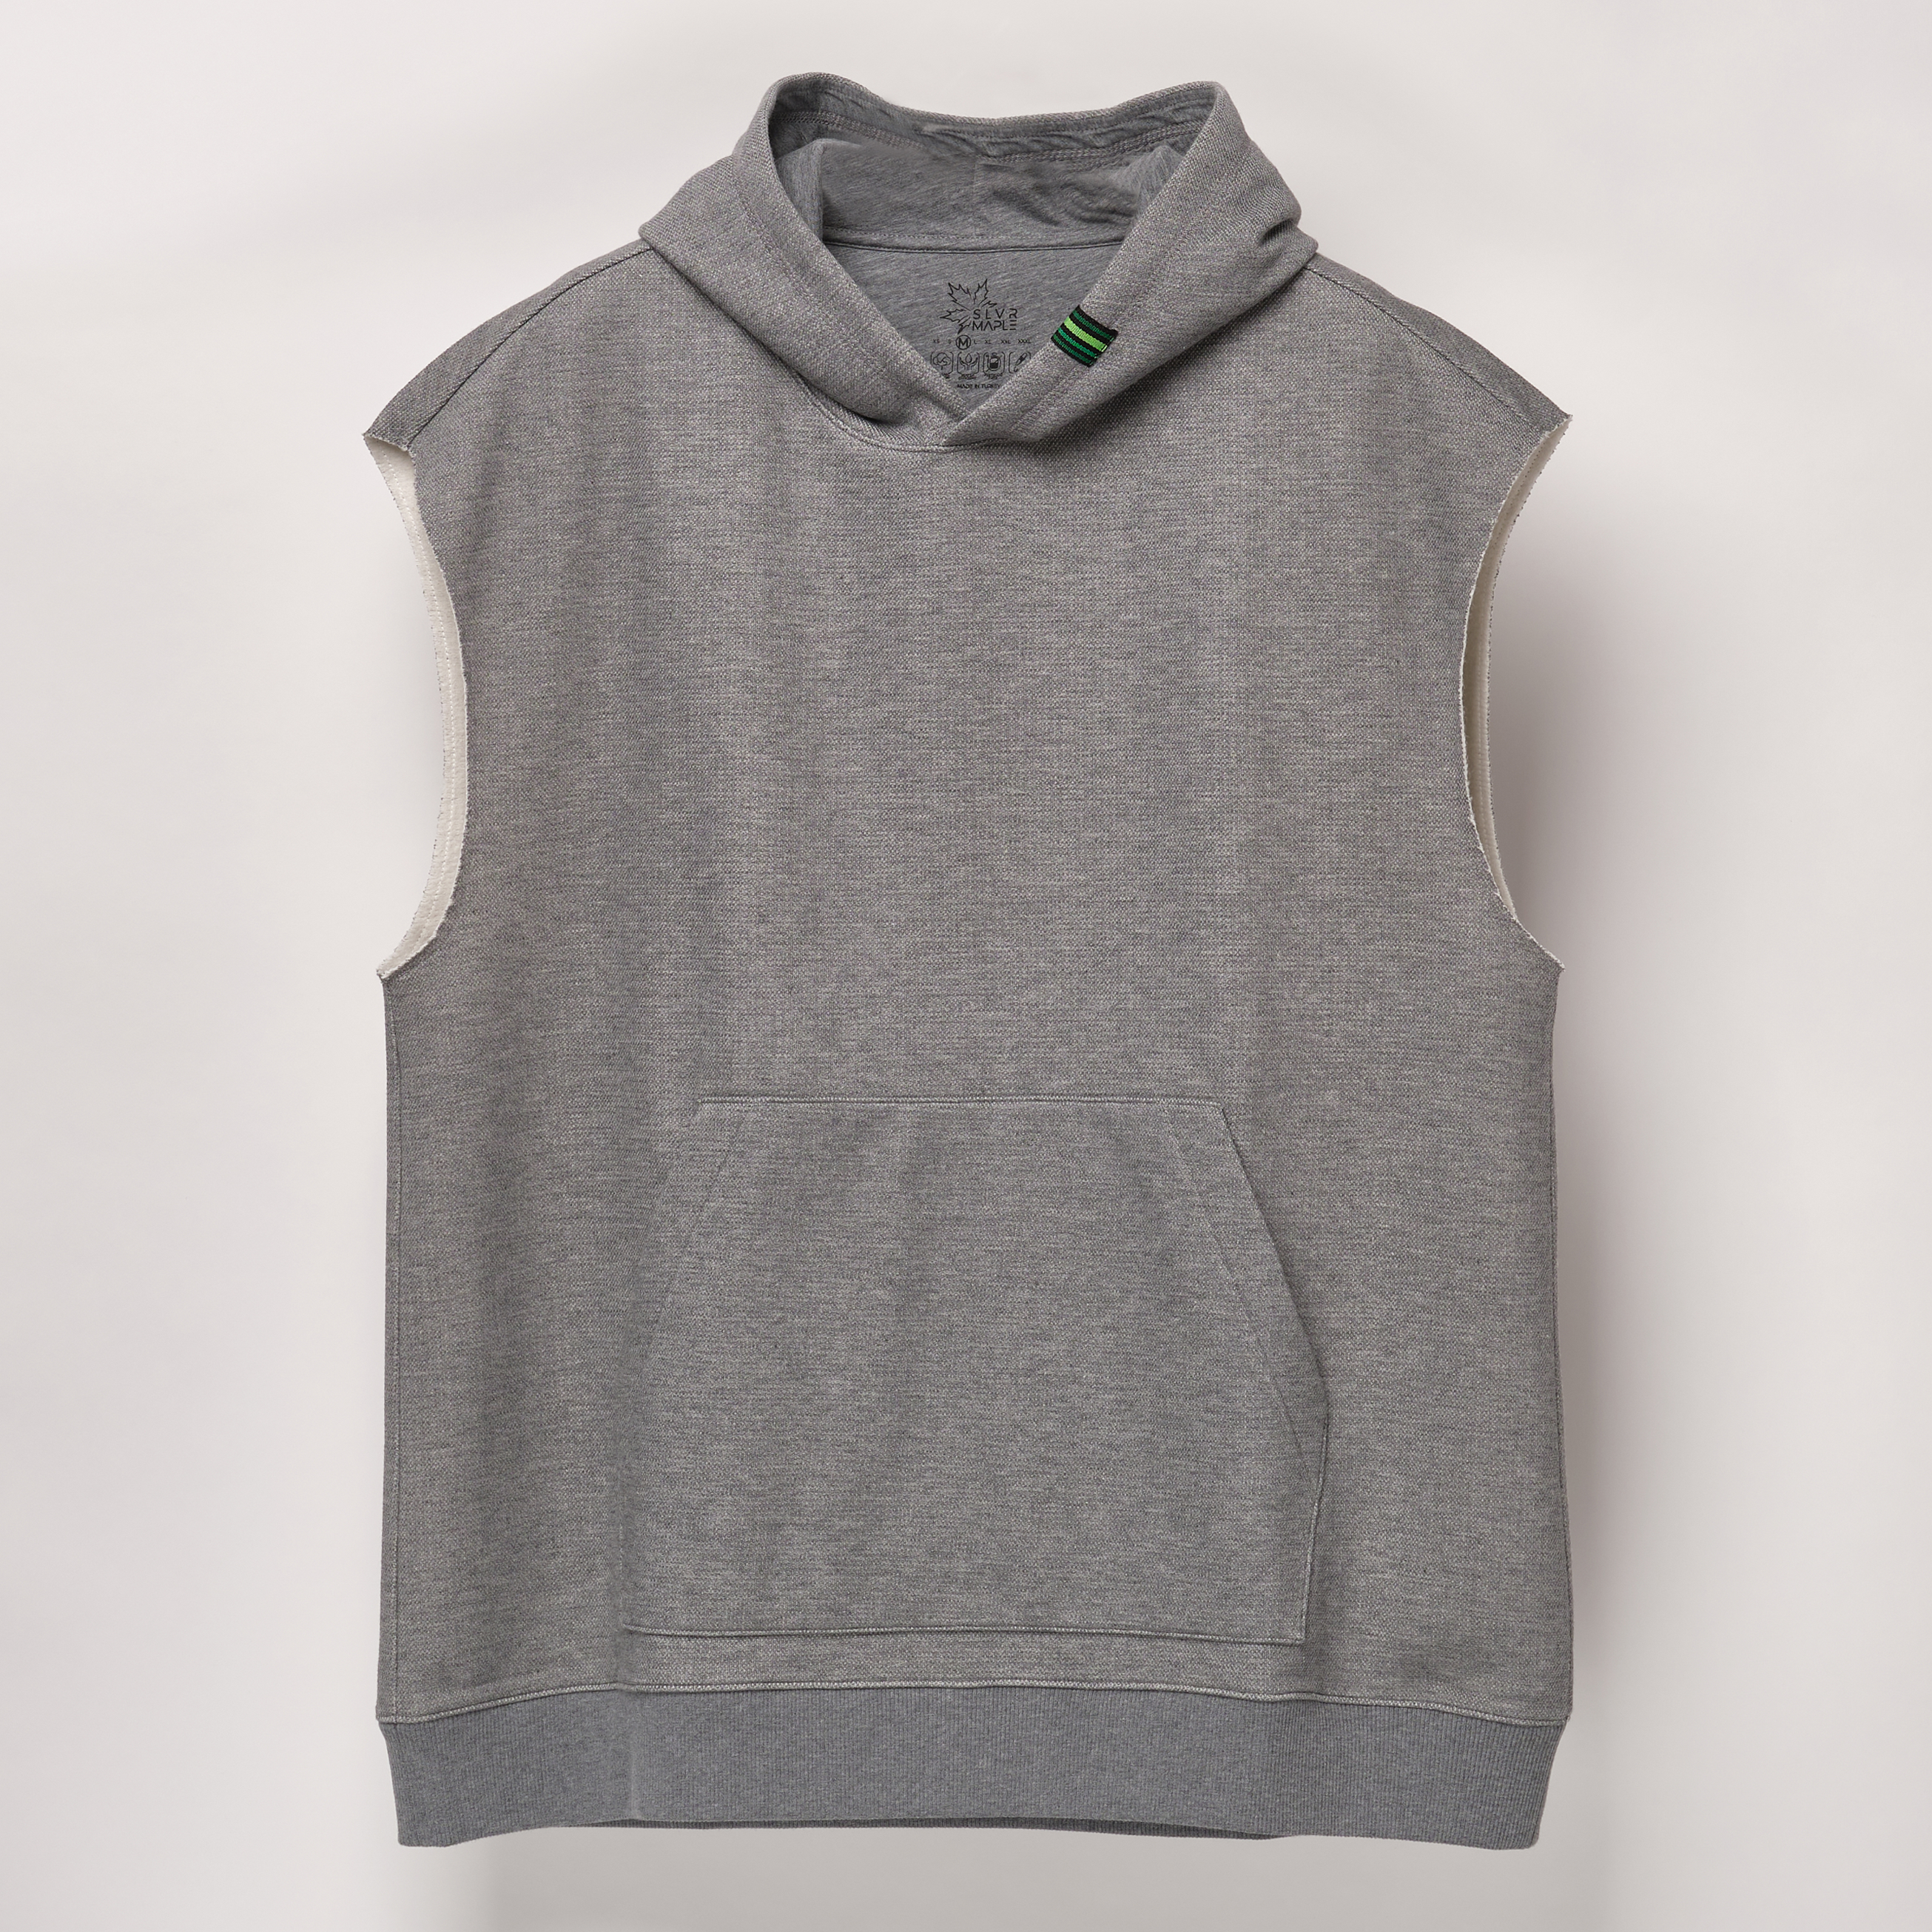 Their Organic Cotton + Seacell Vest